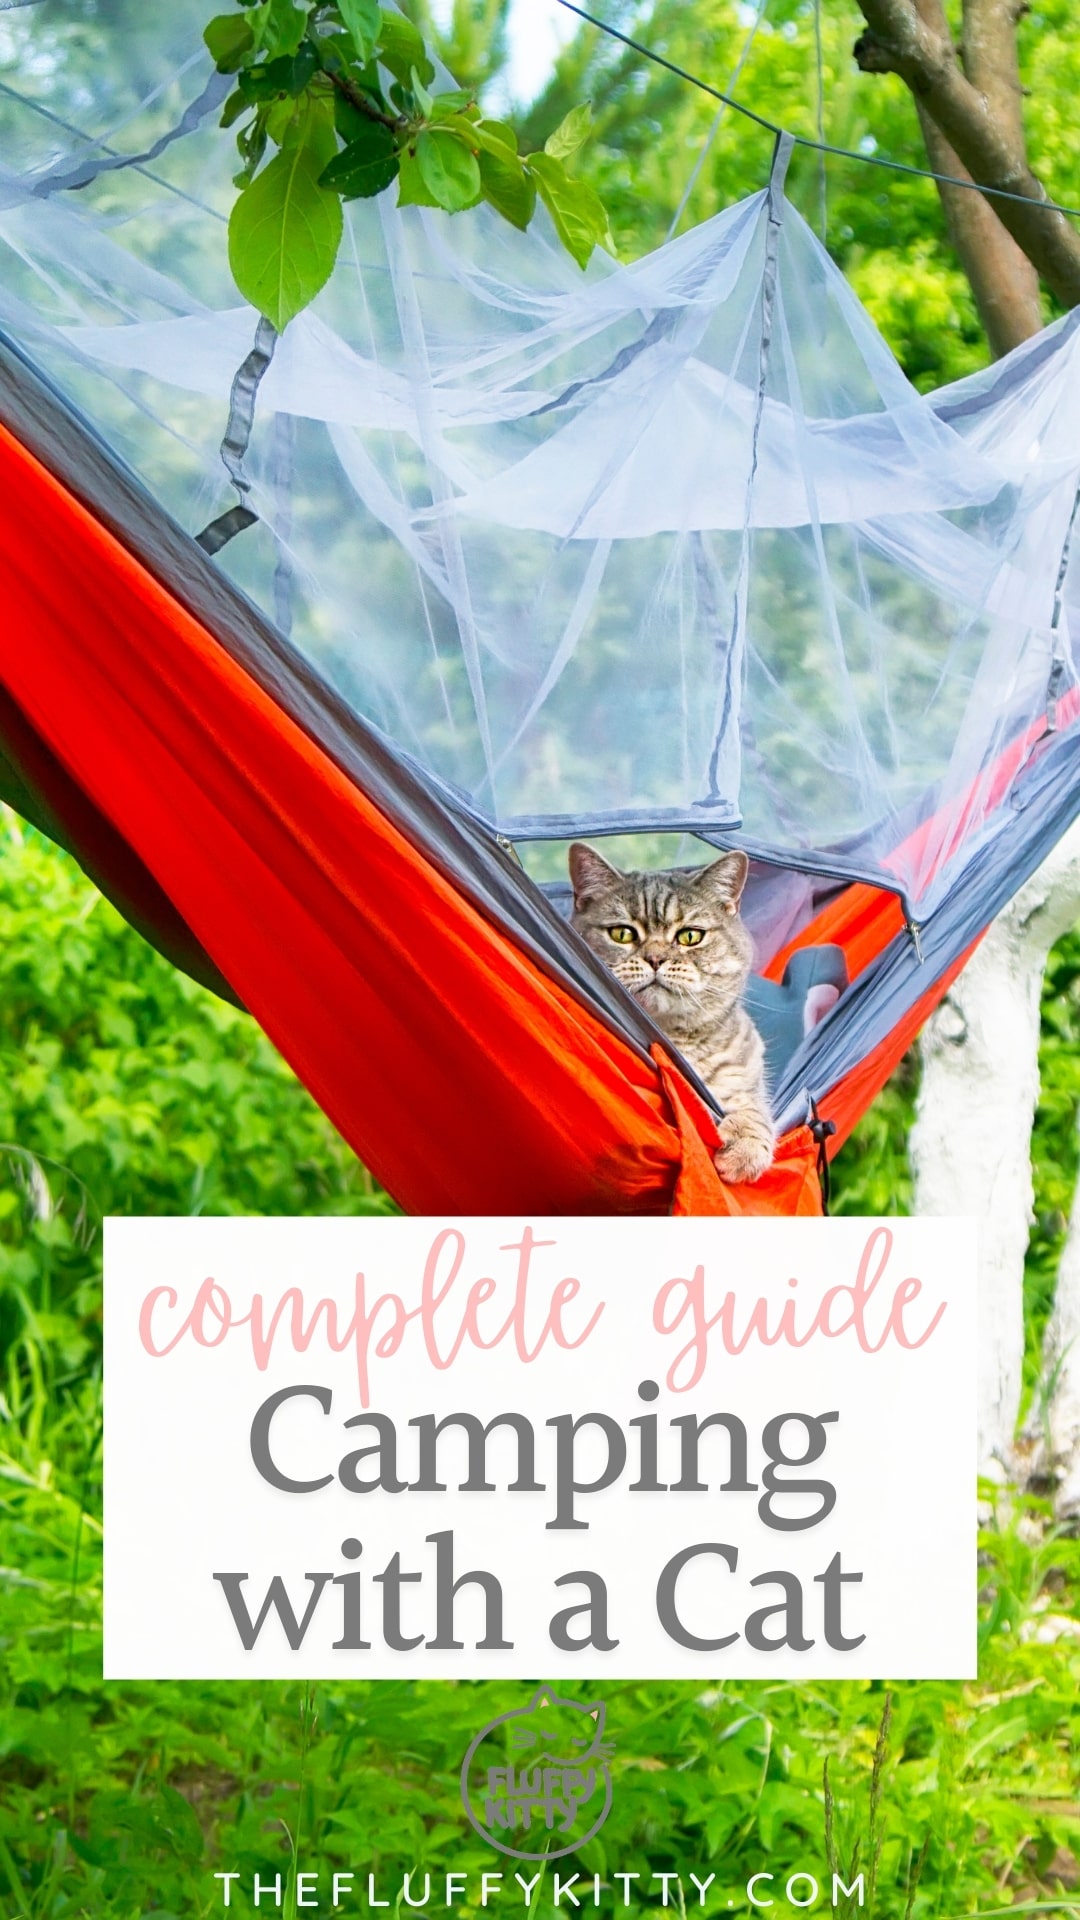 cat in a red hammock while camping, photo with text overlay "complete guide camping with a cat"